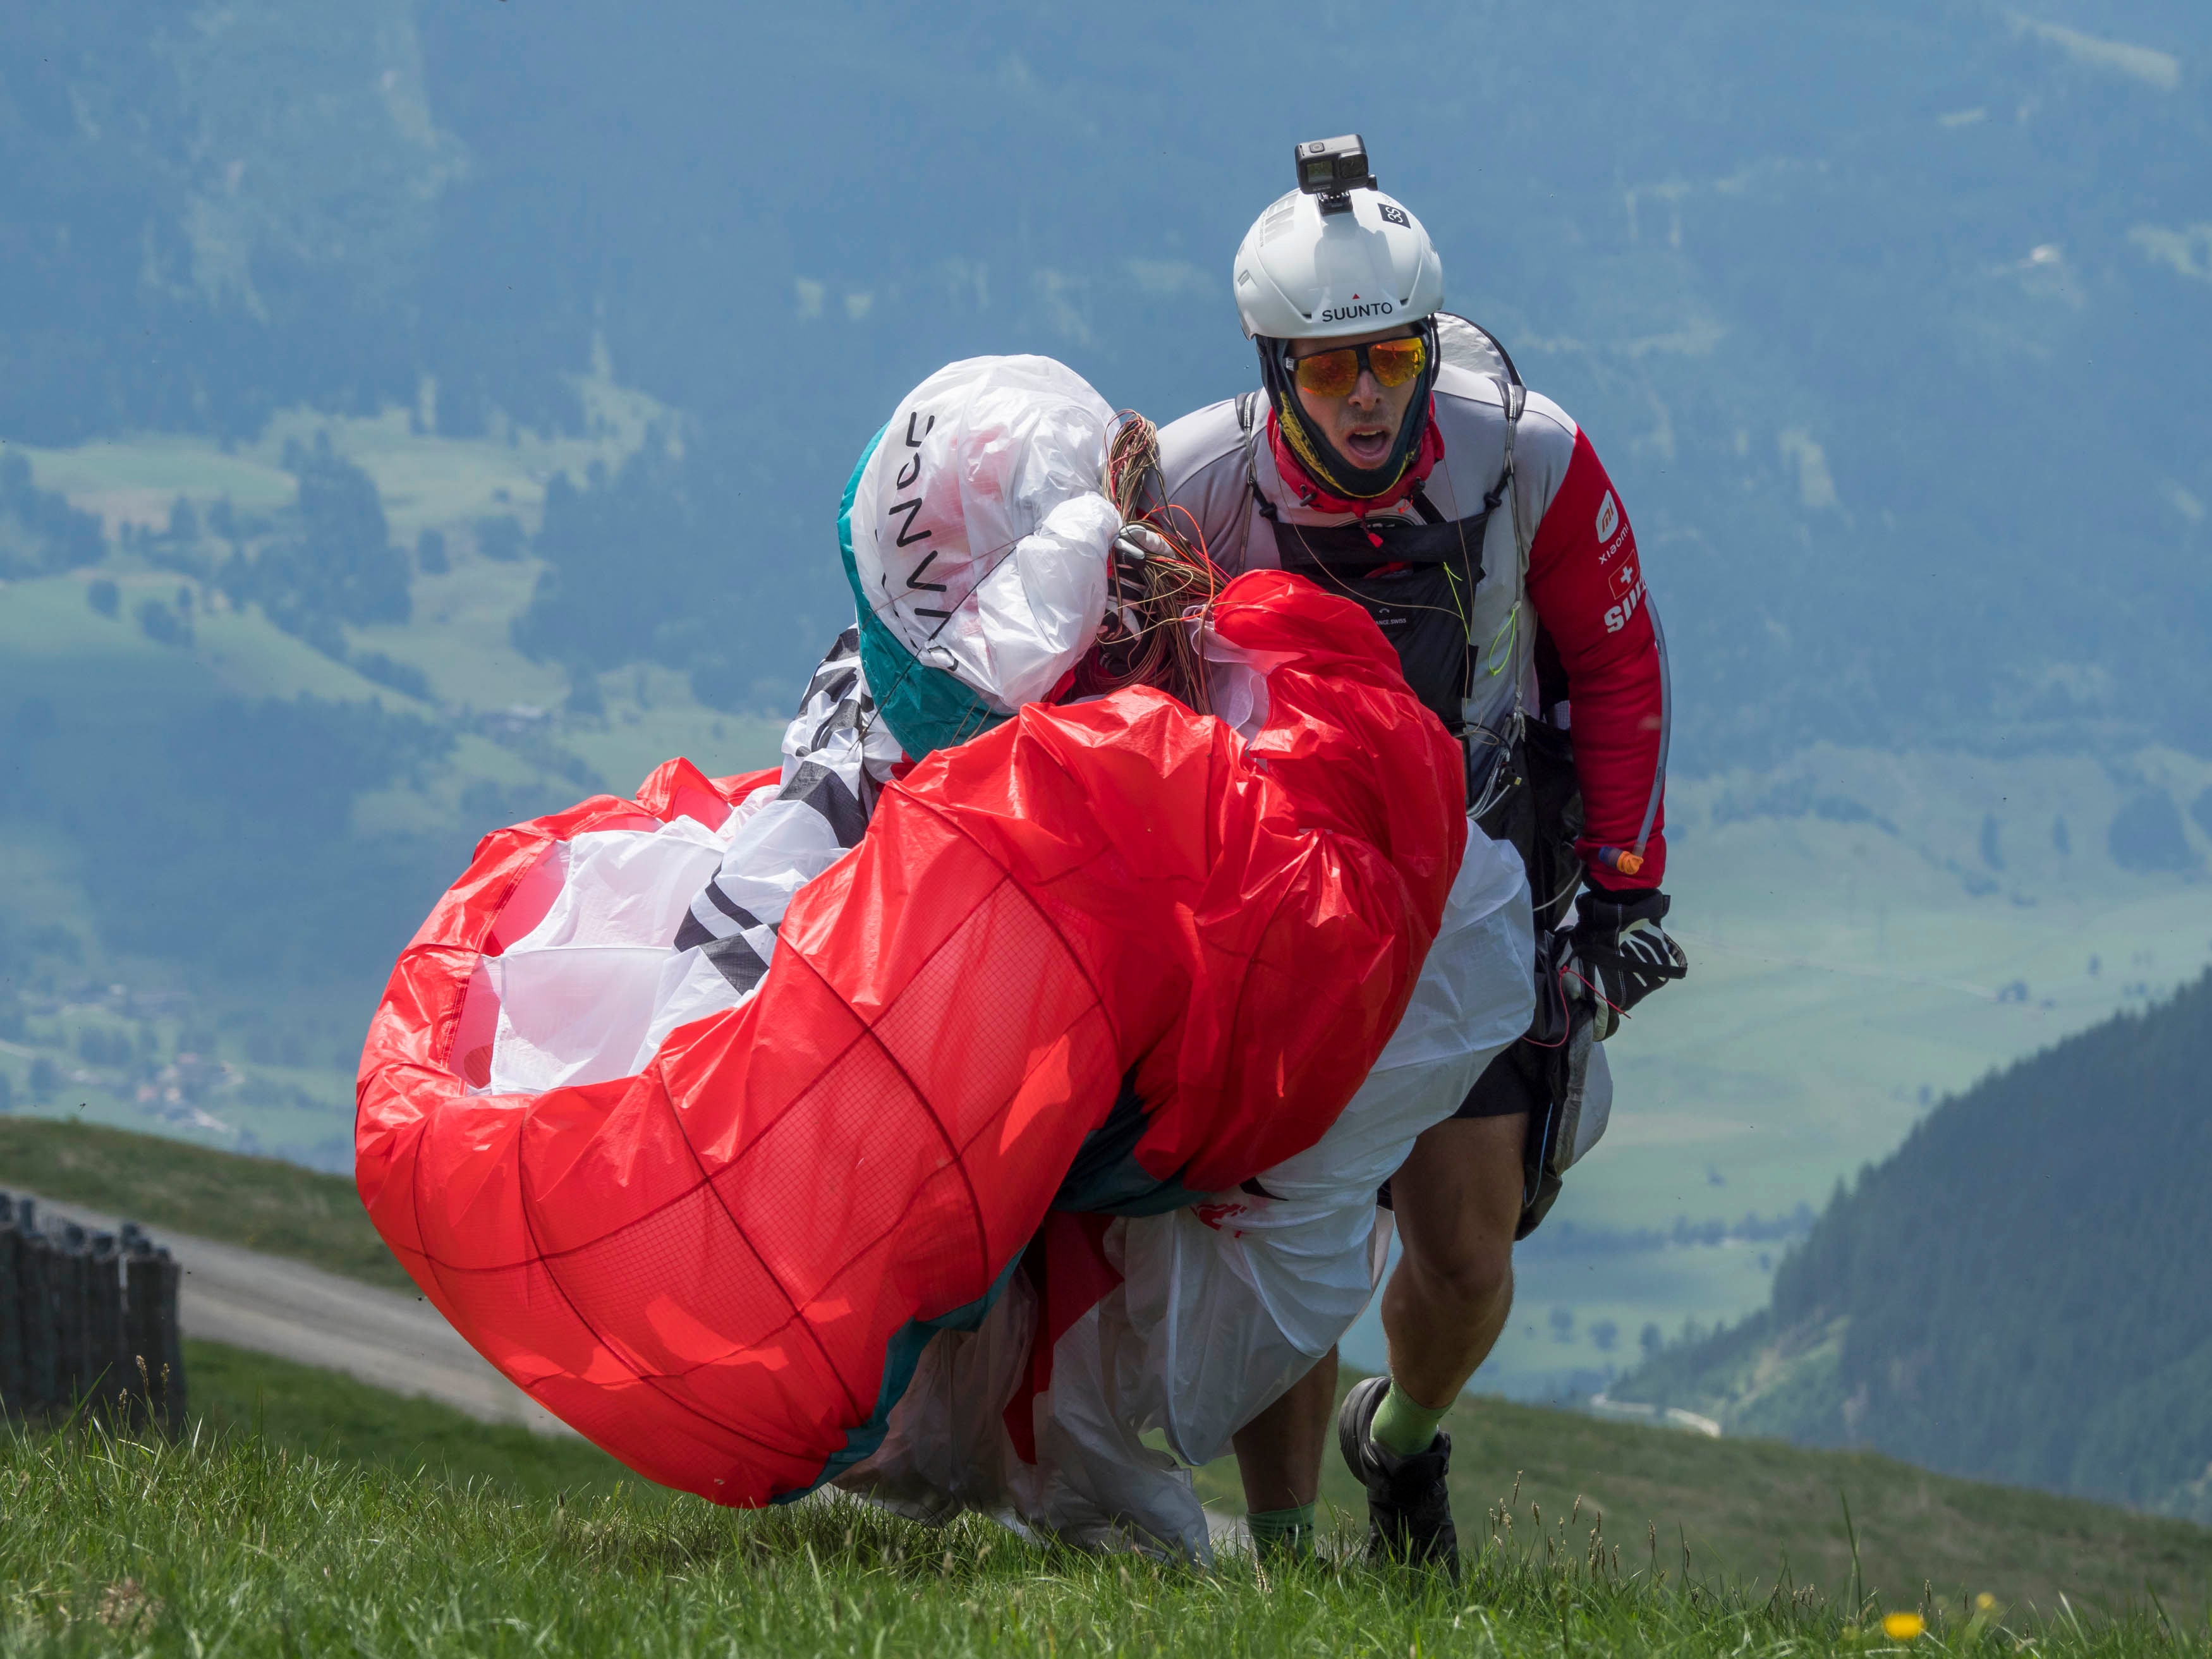 Patrick von Kanel (SUI2) performs during the Red Bull X-Alps 2021 at Schmittenhohe, Zell am See in Austria on June 29, 2021